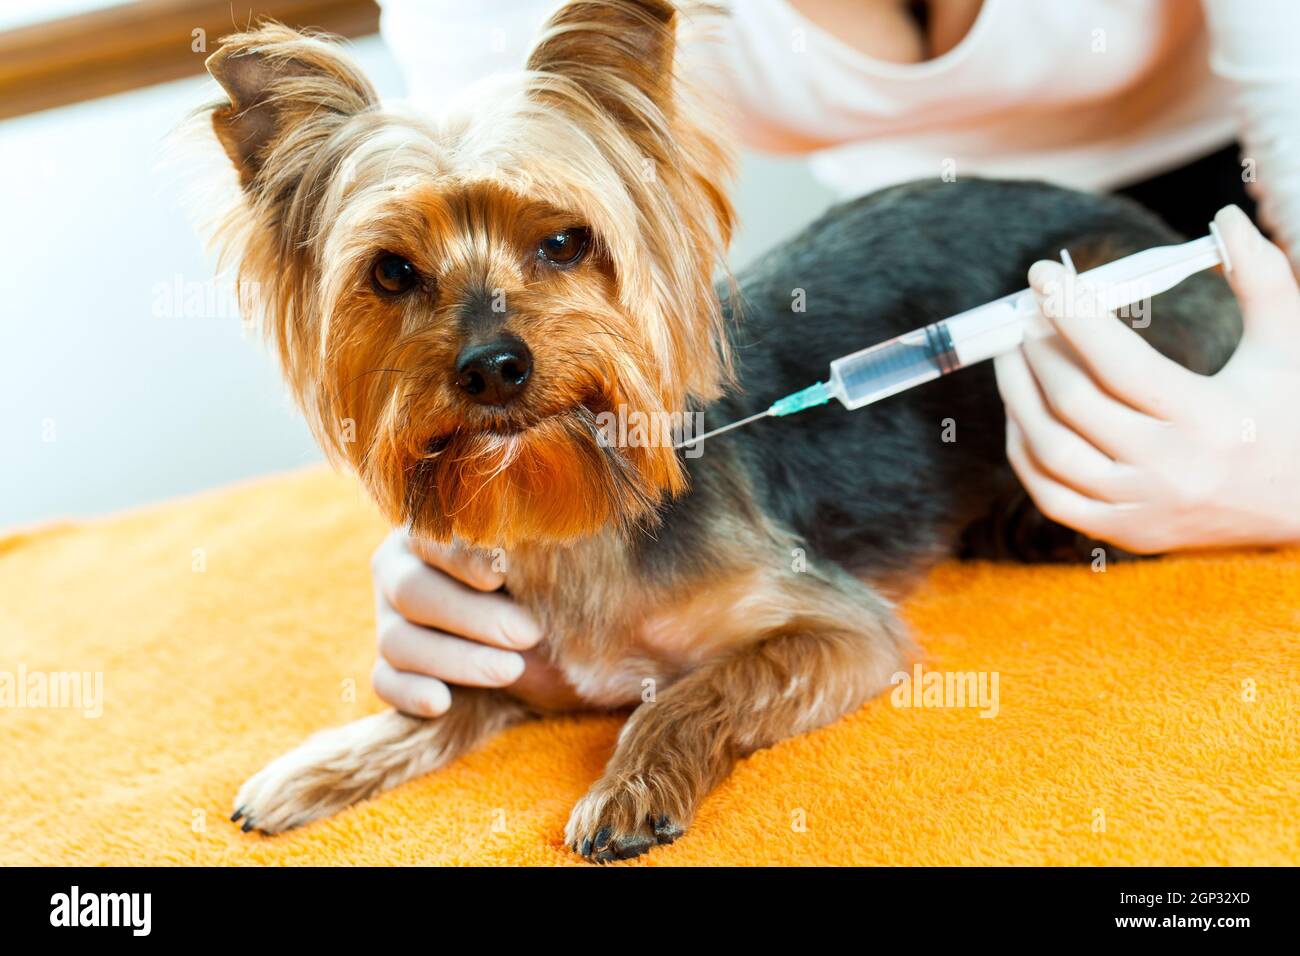 Close up of vet giving Yorkshire dog an injection. Stock Photo